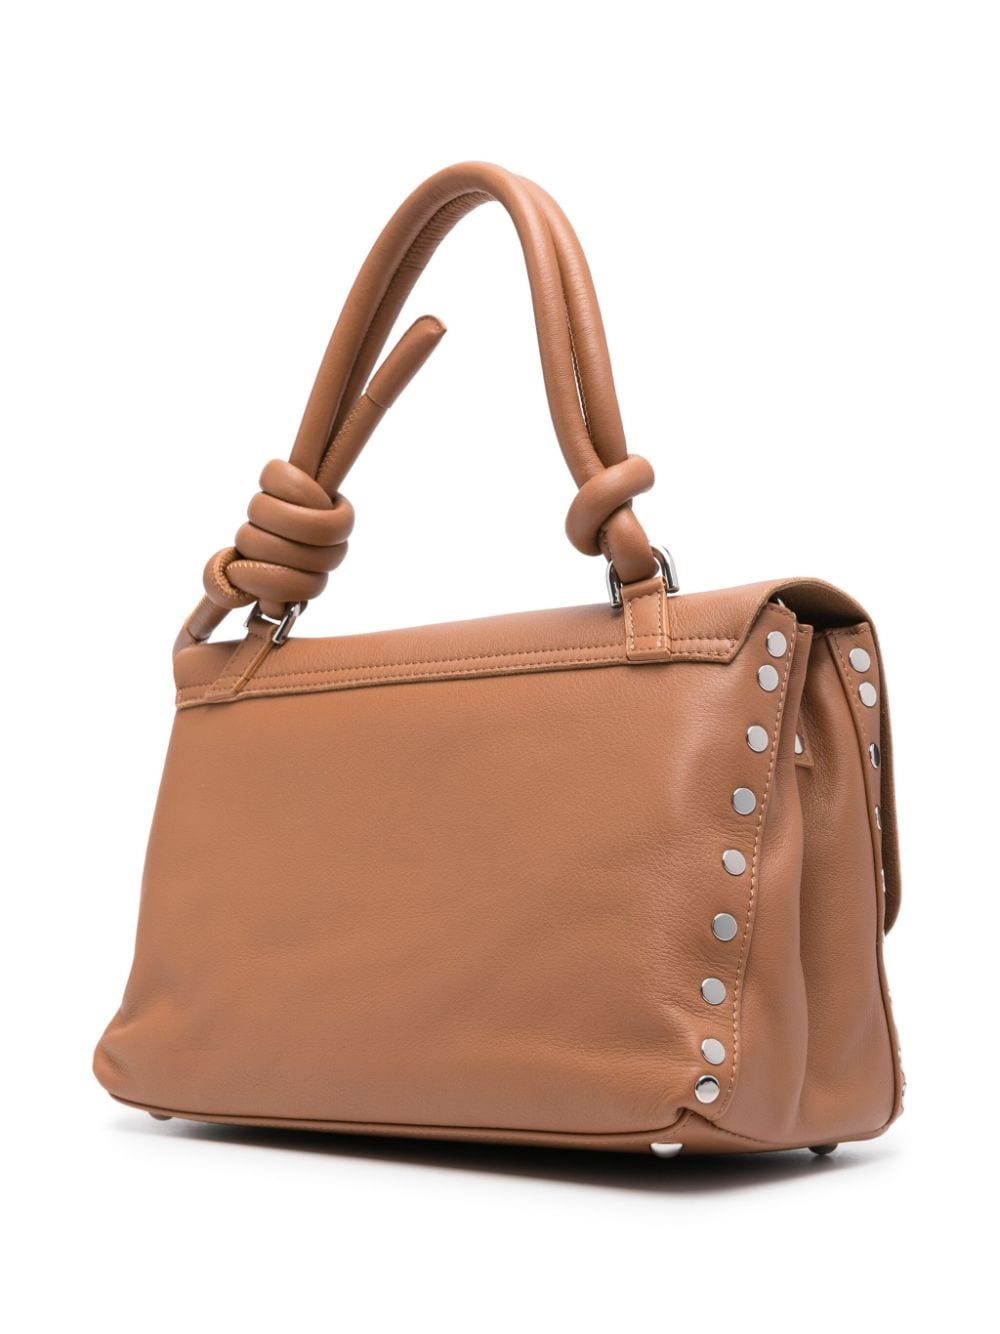 Tan Leather Handbag with Knot Detailing and Silver-Tone Hardware